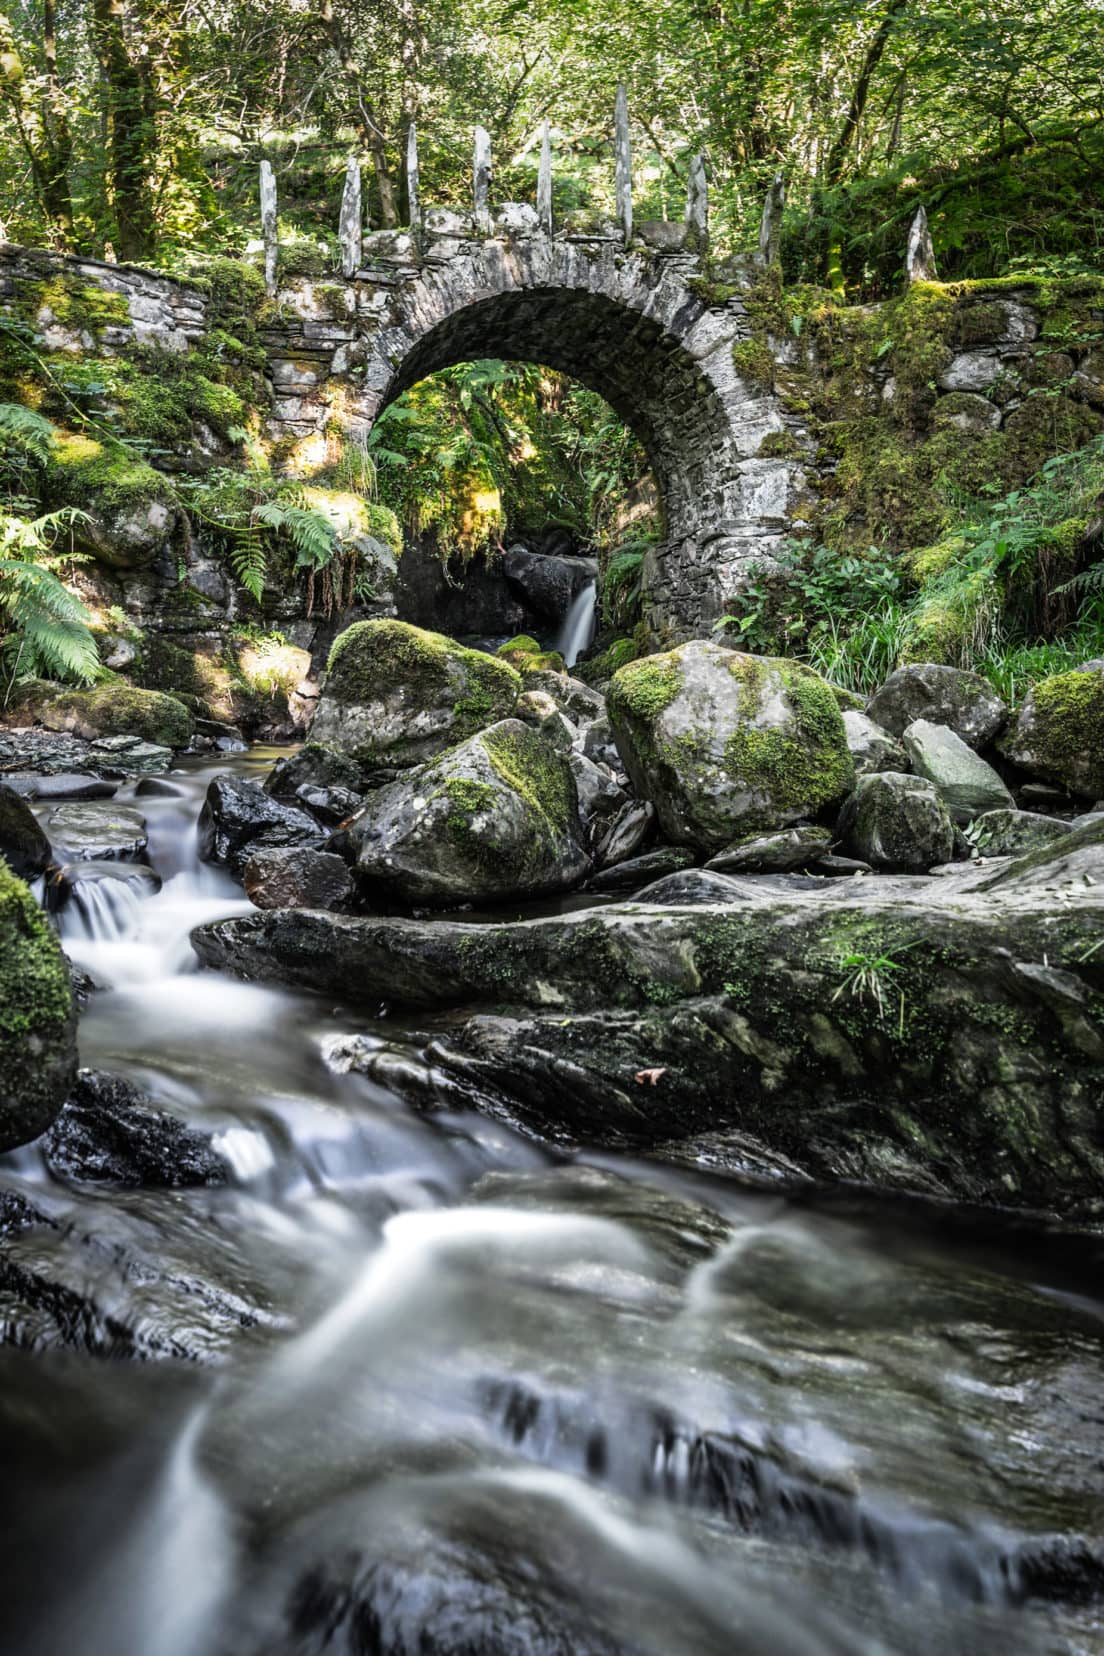 arched stone bridge with a waterfall behind and water blurred through long exposure